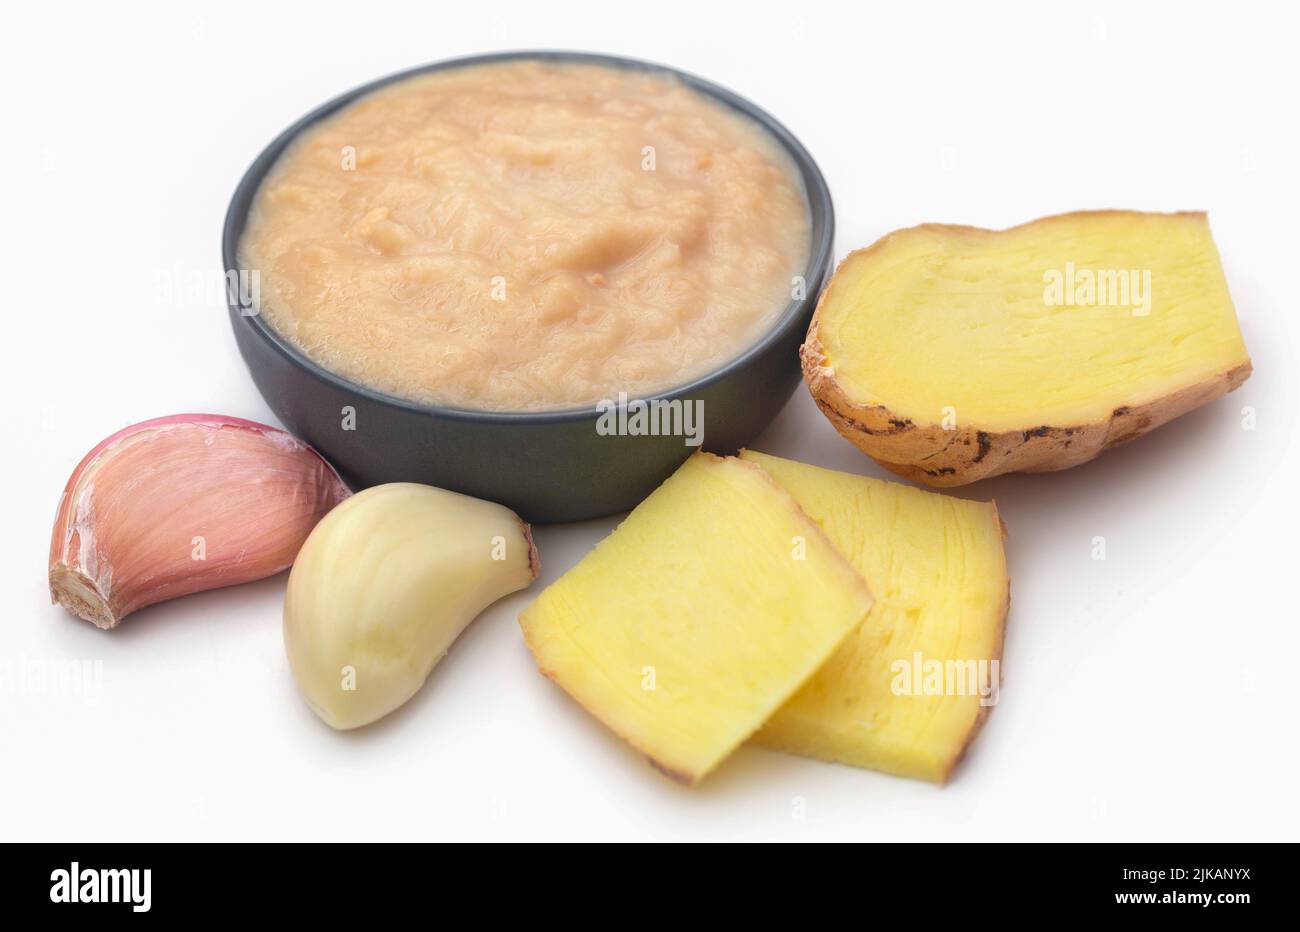 Ginger and garlic with paste over white background Stock Photo